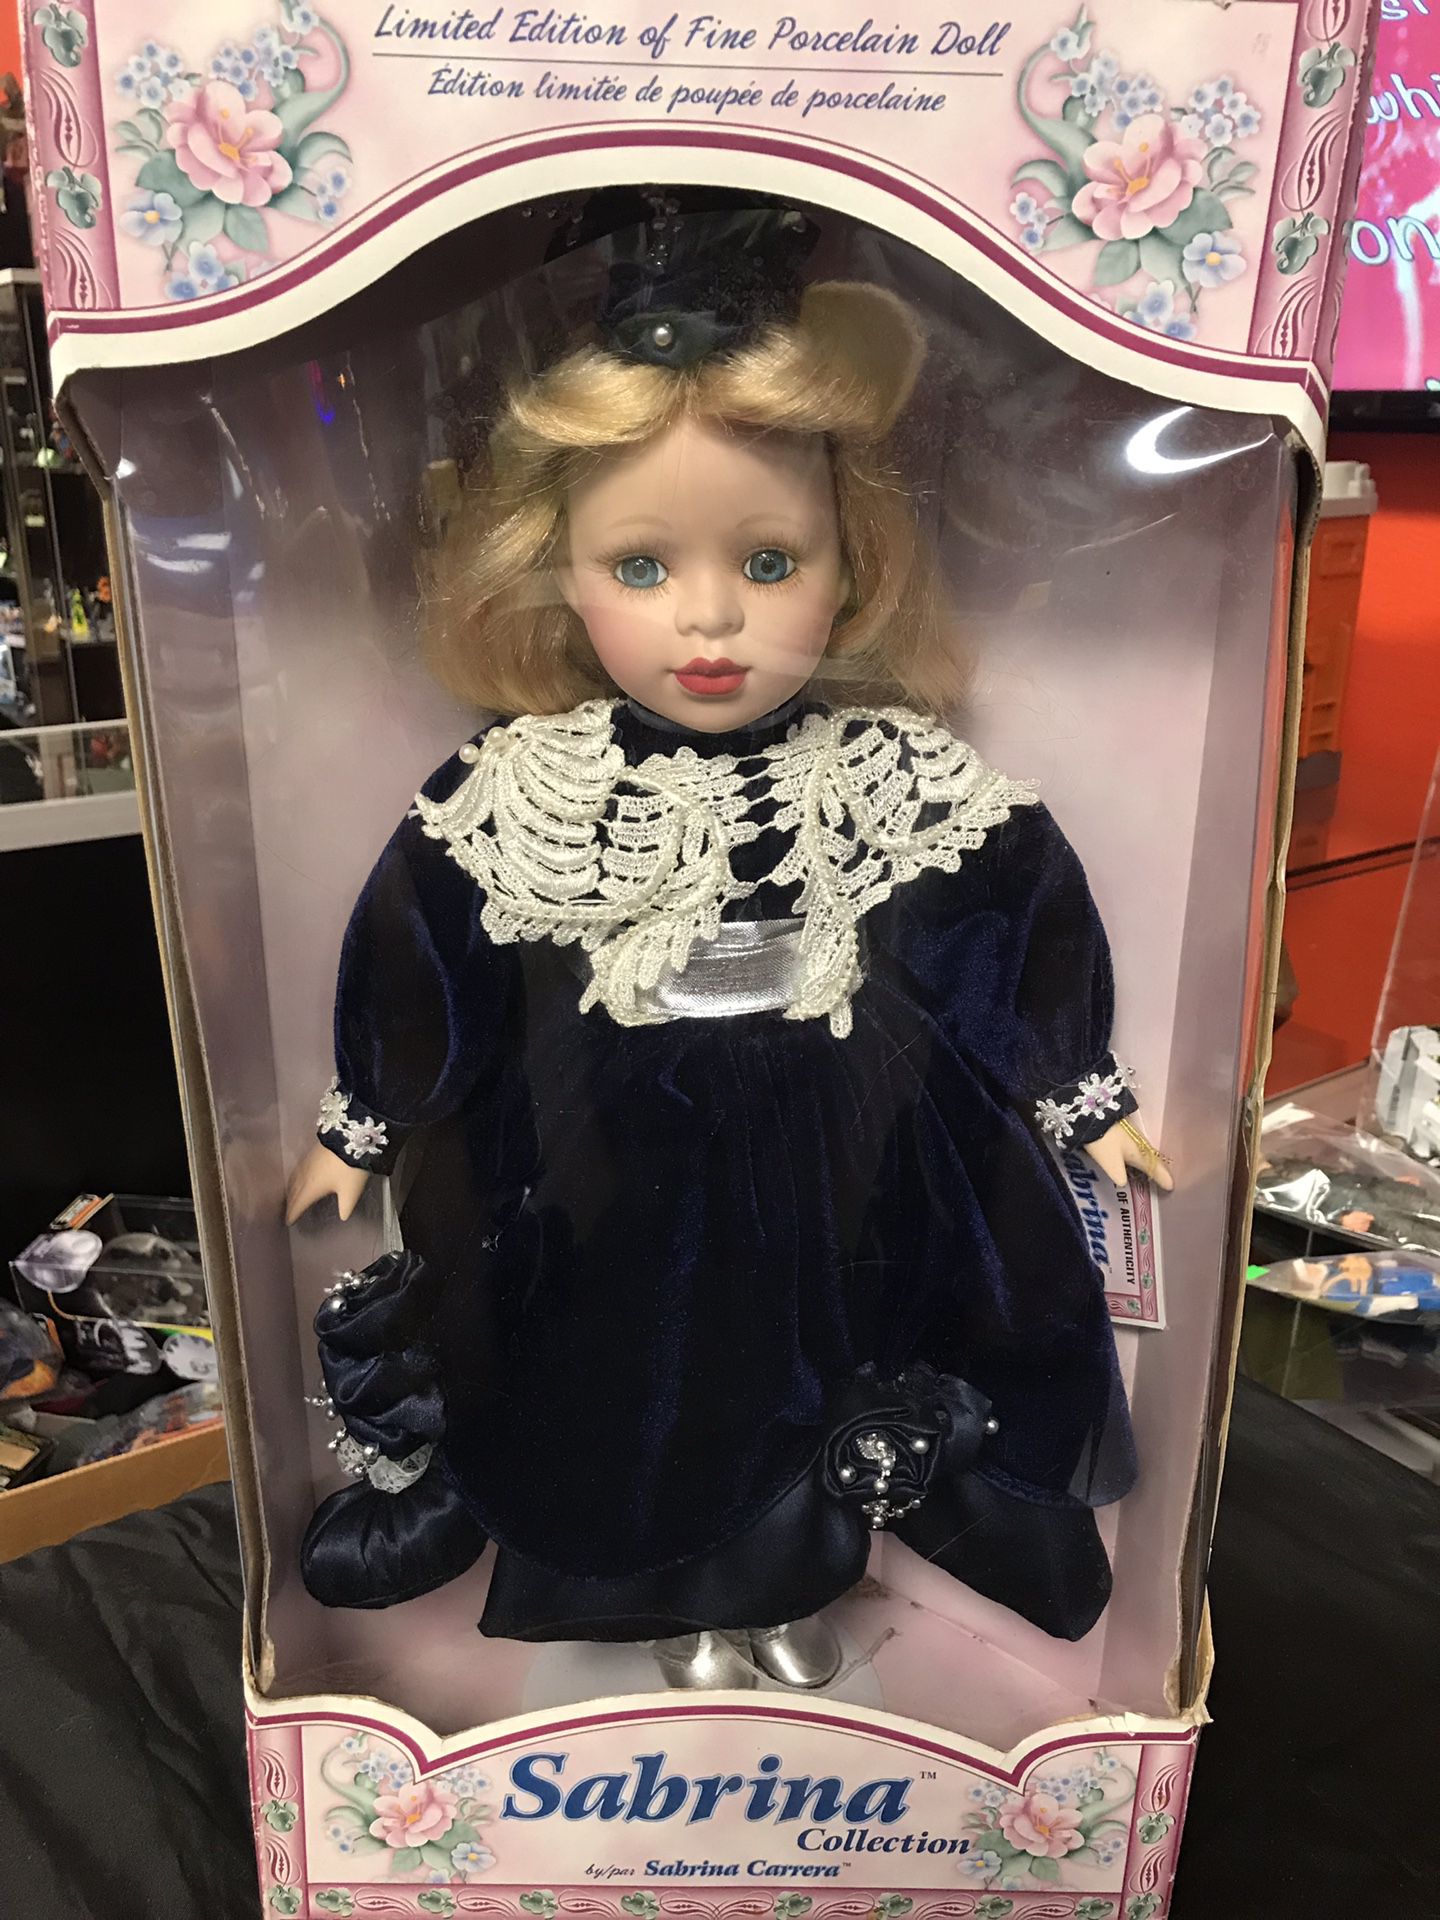 Sabrina Collection - Limited Edition Of Fine Porcelain Doll